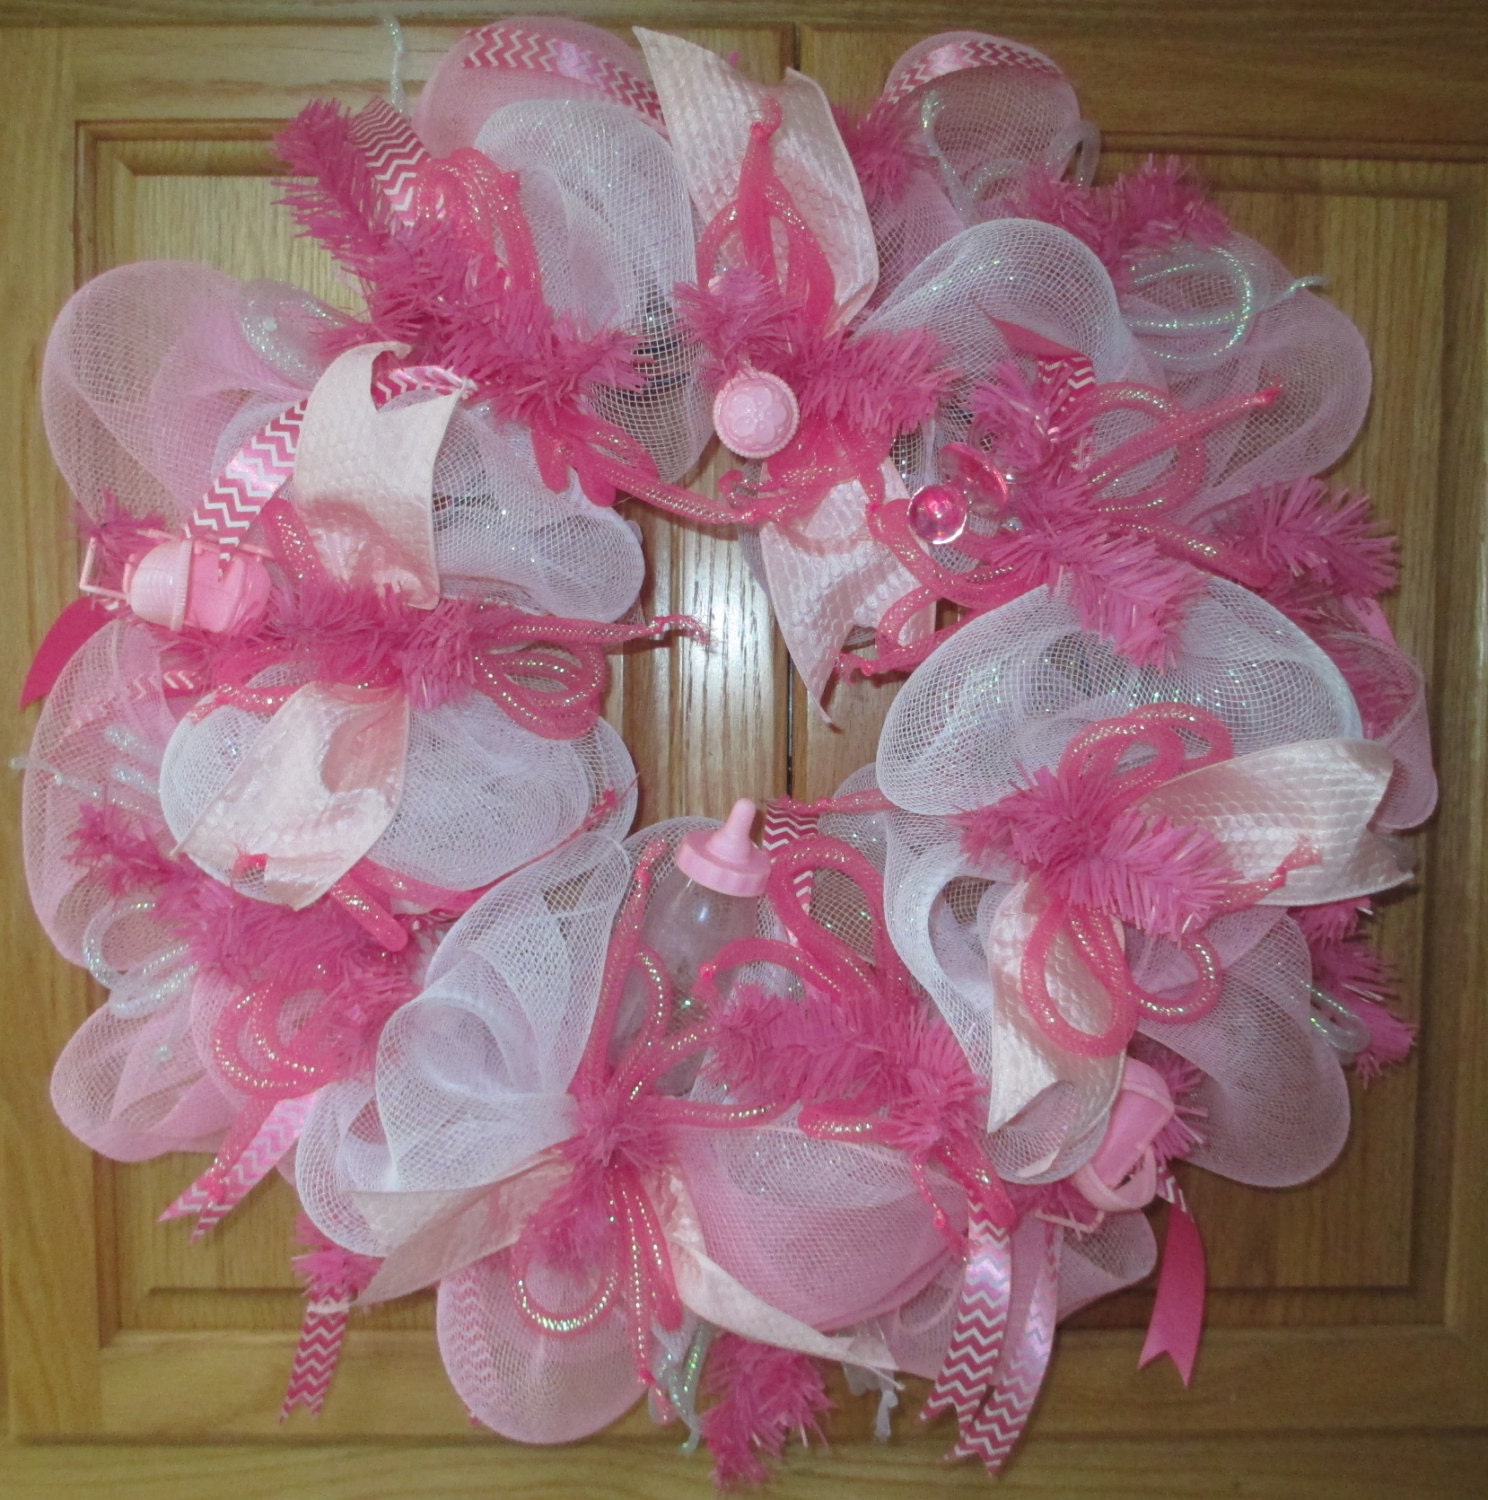 Pink Baby Deco Mesh Wreath w/ a Touch of Chevron Pink Ribbon